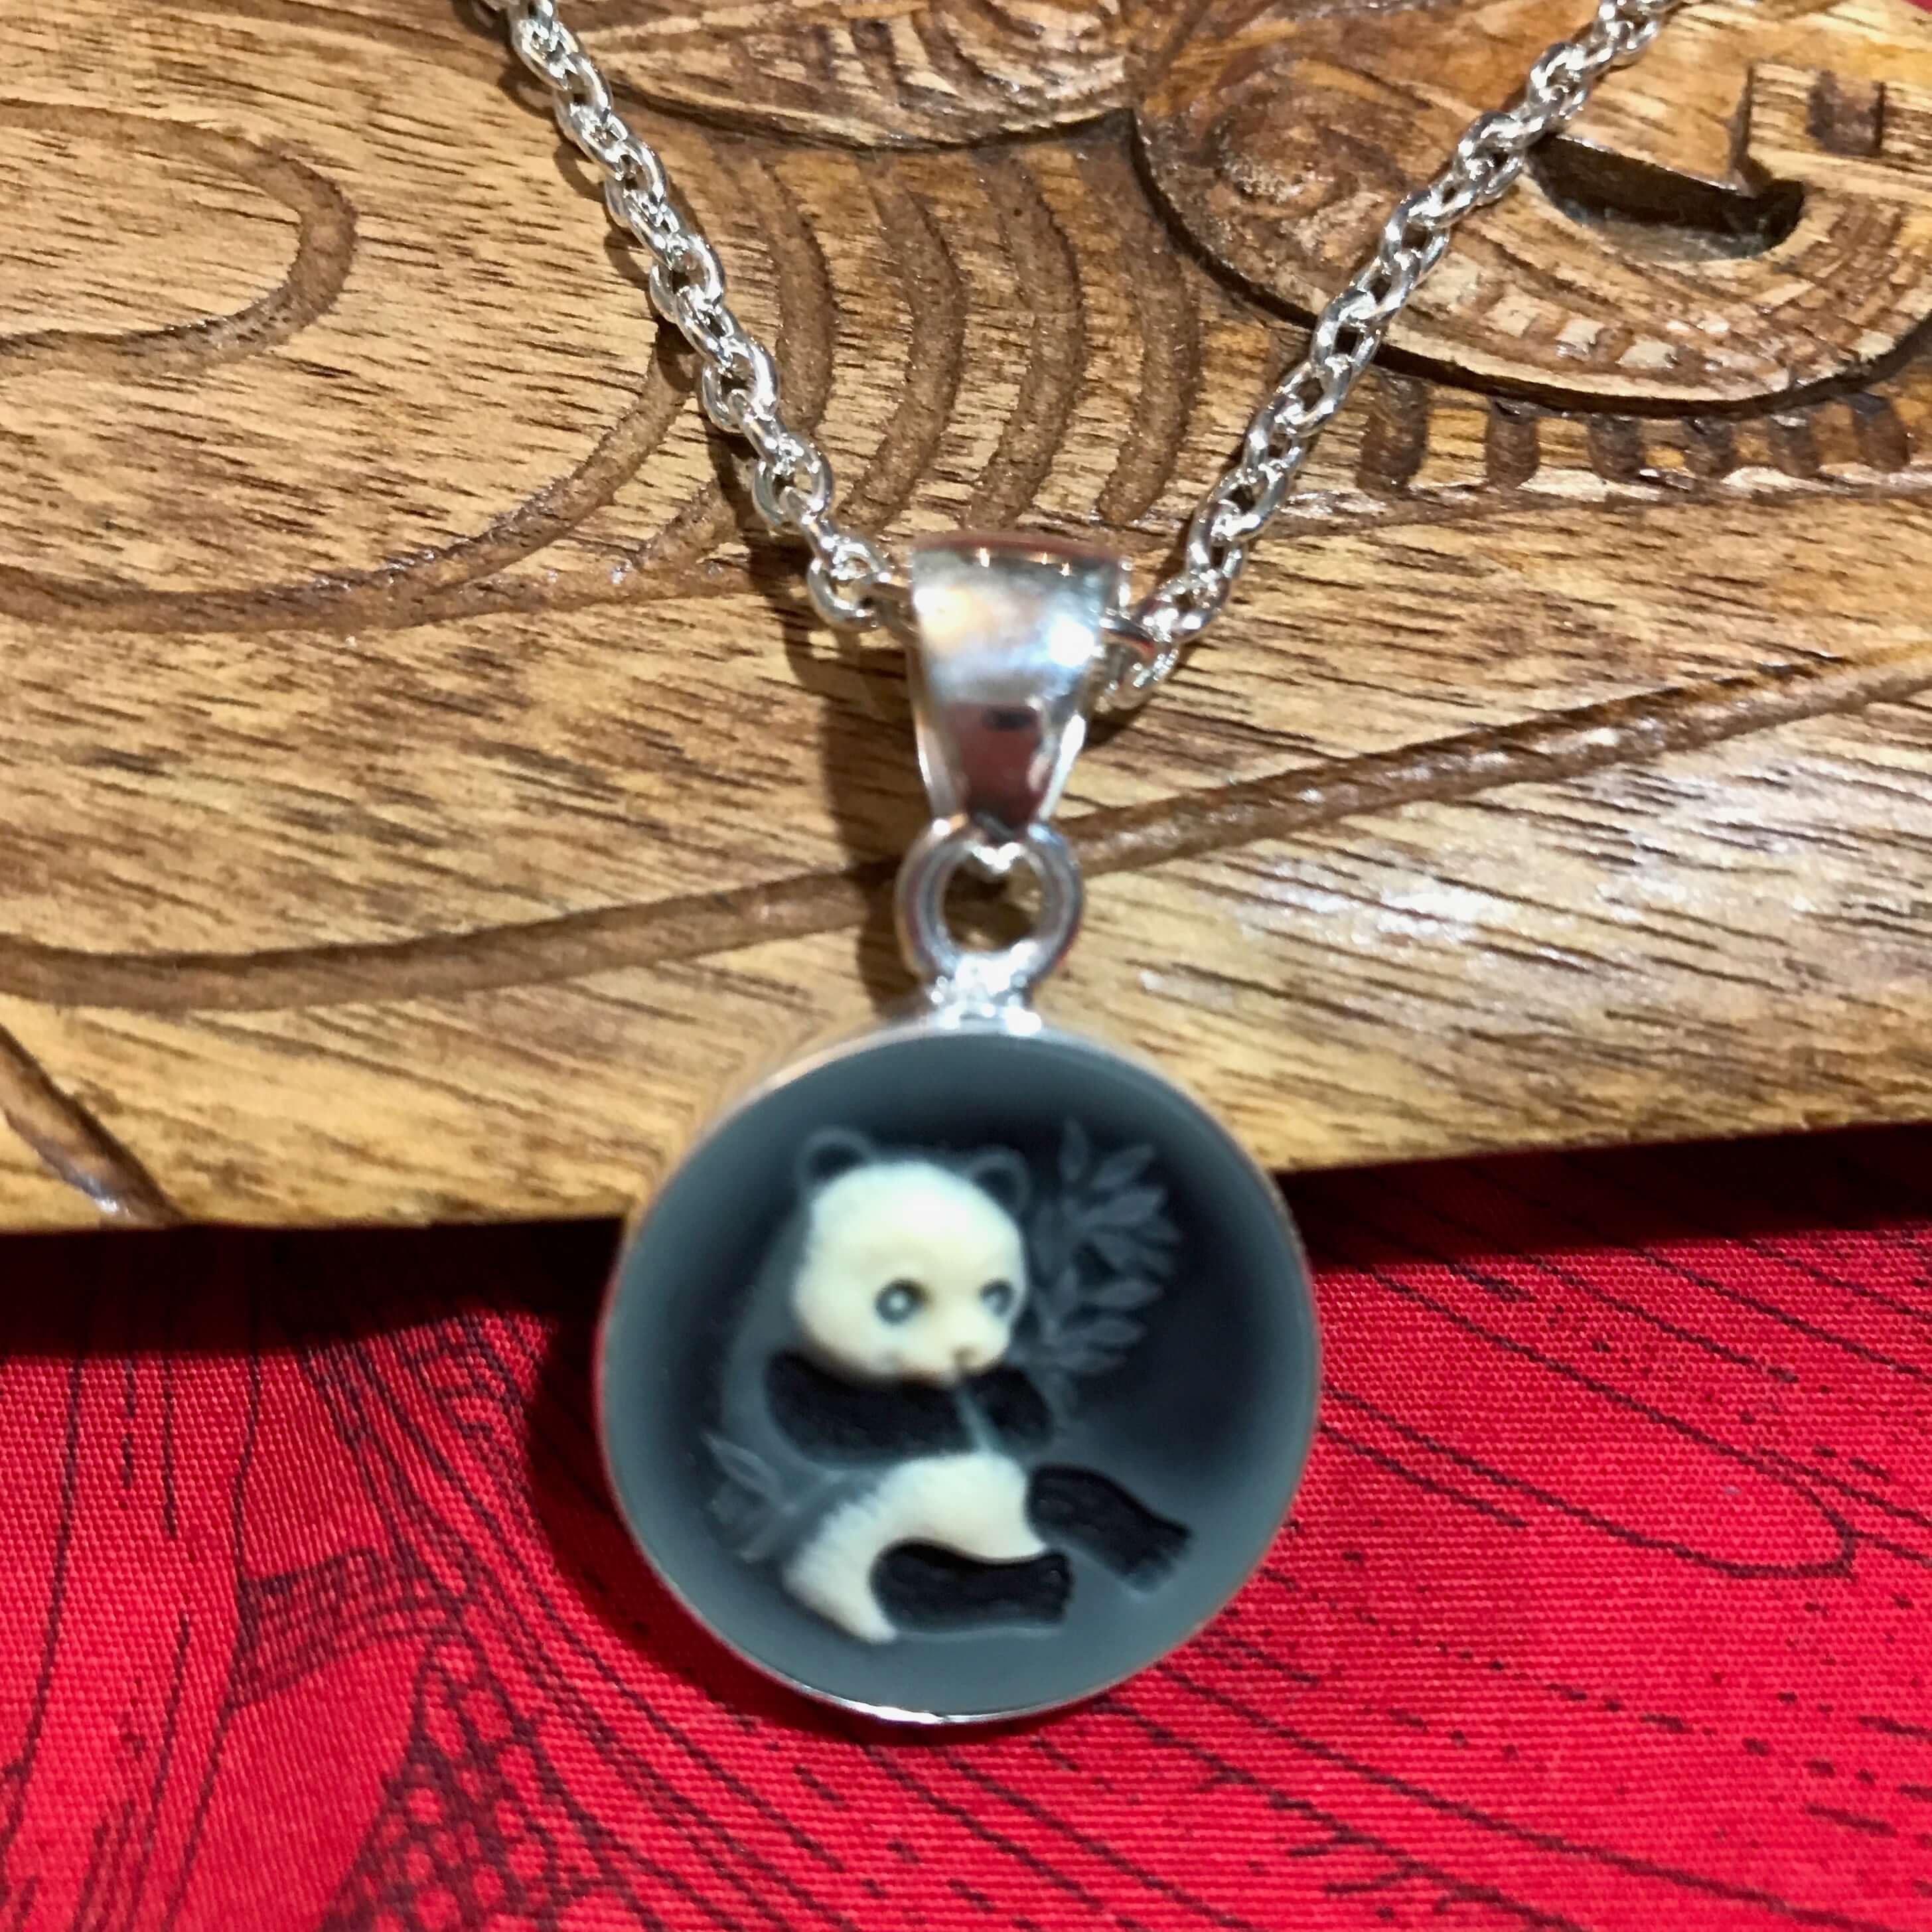 Island jewelry adorable panda bear cameo pendant necklace set in stirling silver | Aloha Products USA